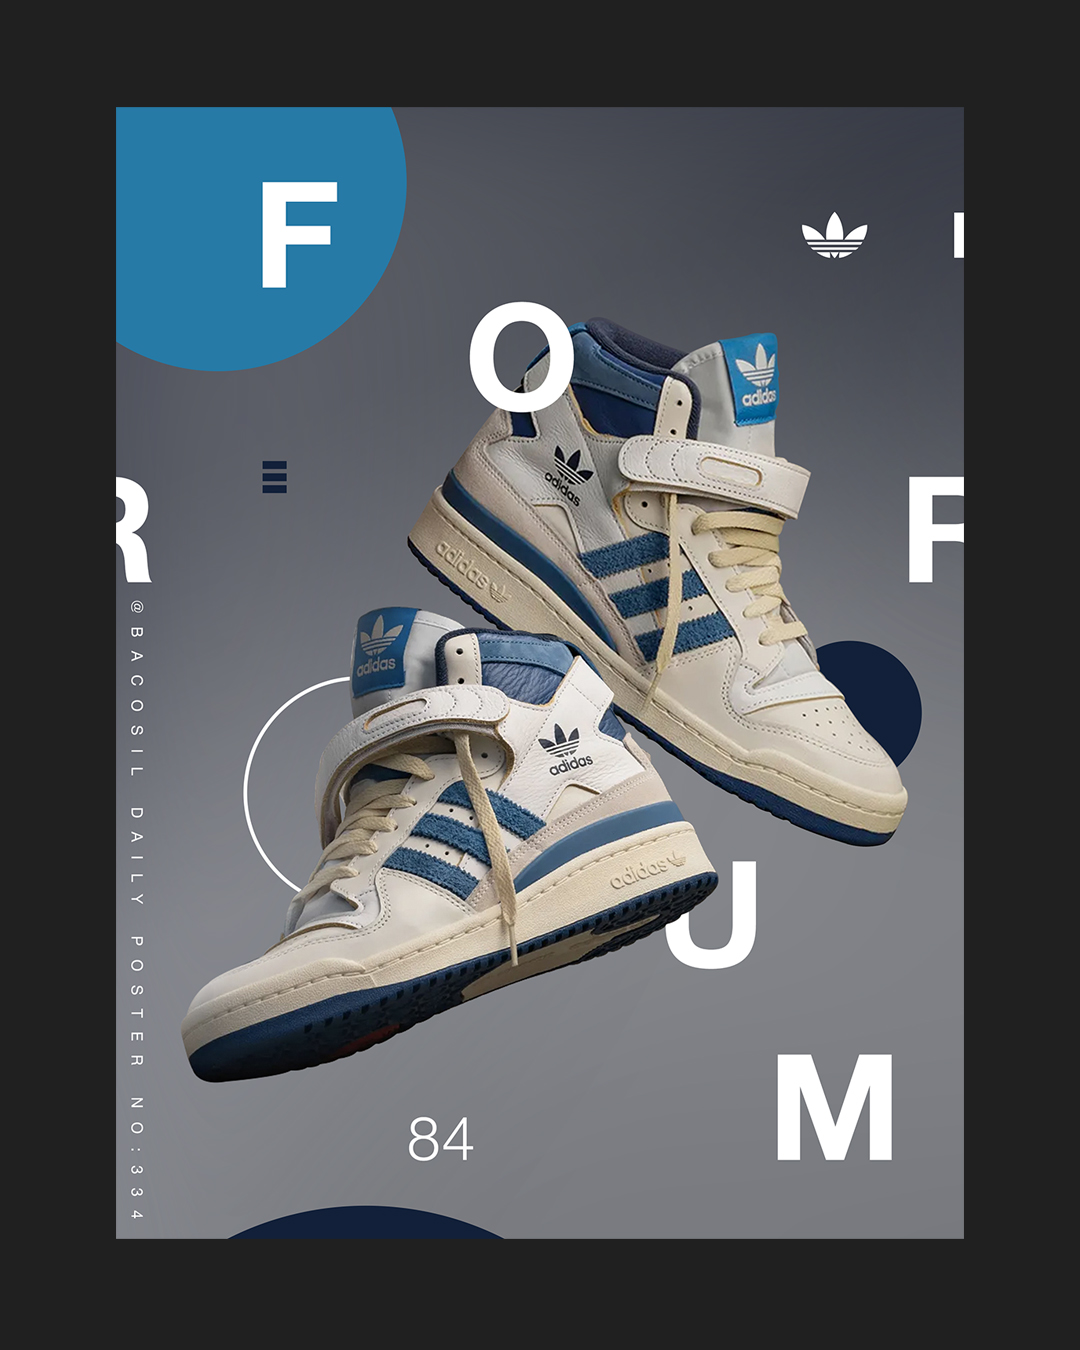 Bacosil on Twitter: Forum 04/05 Daily Poster Design No.334 - See all poster https://t.co/12aIsPsjhd #graphicdesign #posterdesign #sneakers #adidas https://t.co/pxhHhWMIX1" / Twitter